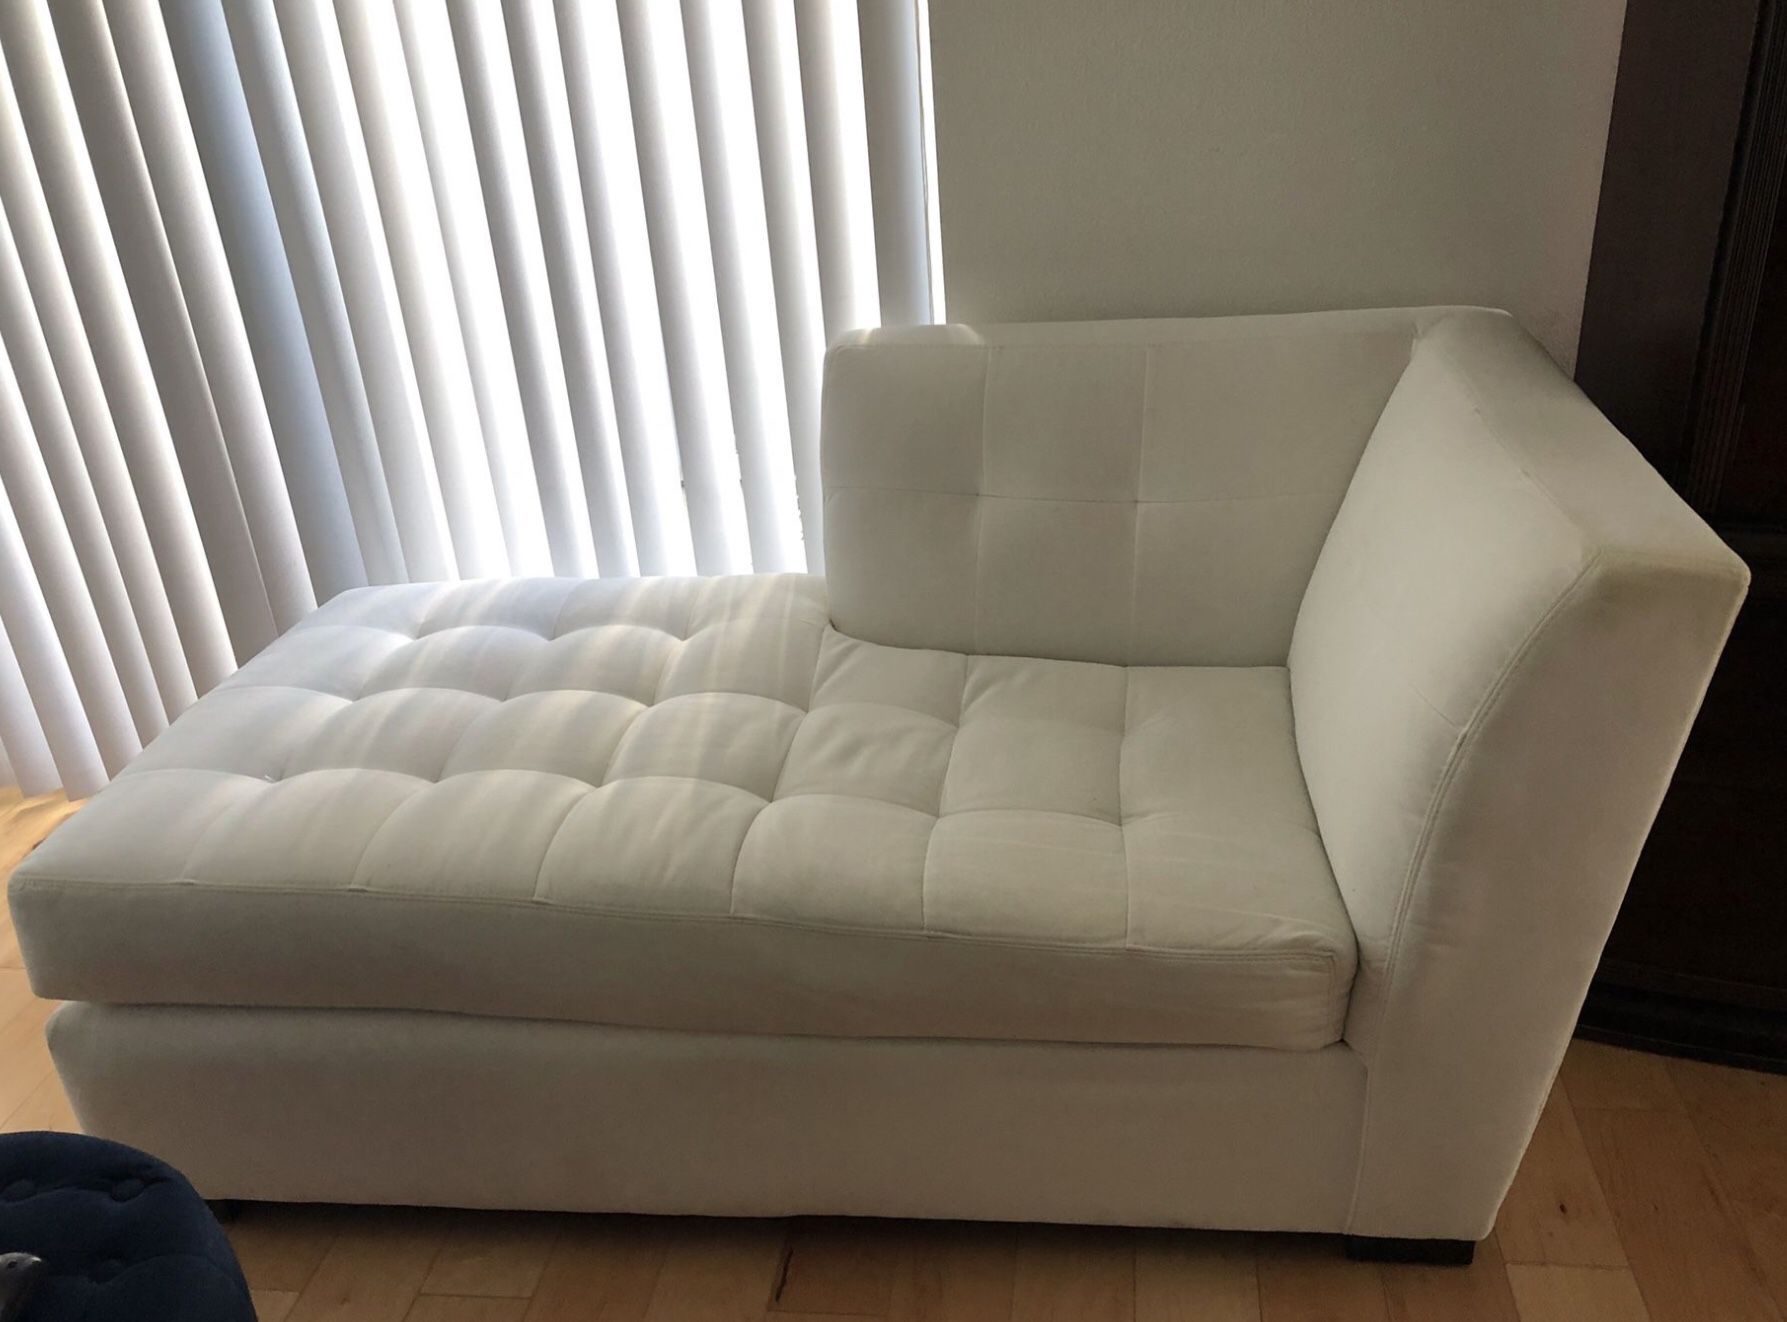 Macy’s White Tufted Sectional Chaise In Good Used Condition,  No Stains, No Smoking/odors. 